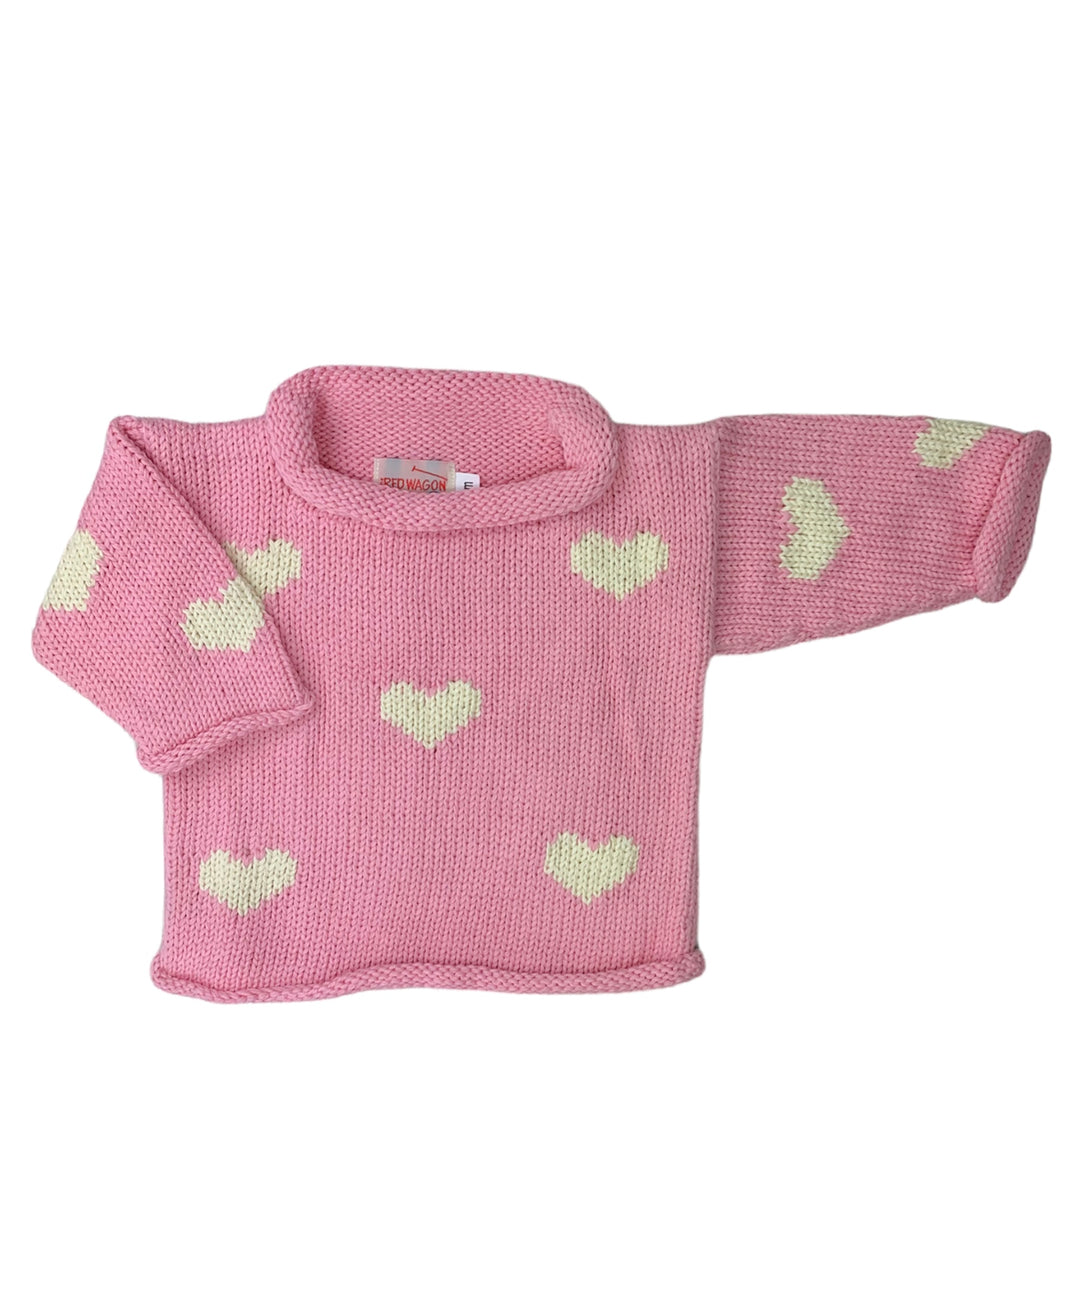 Pink sweater with white hearts